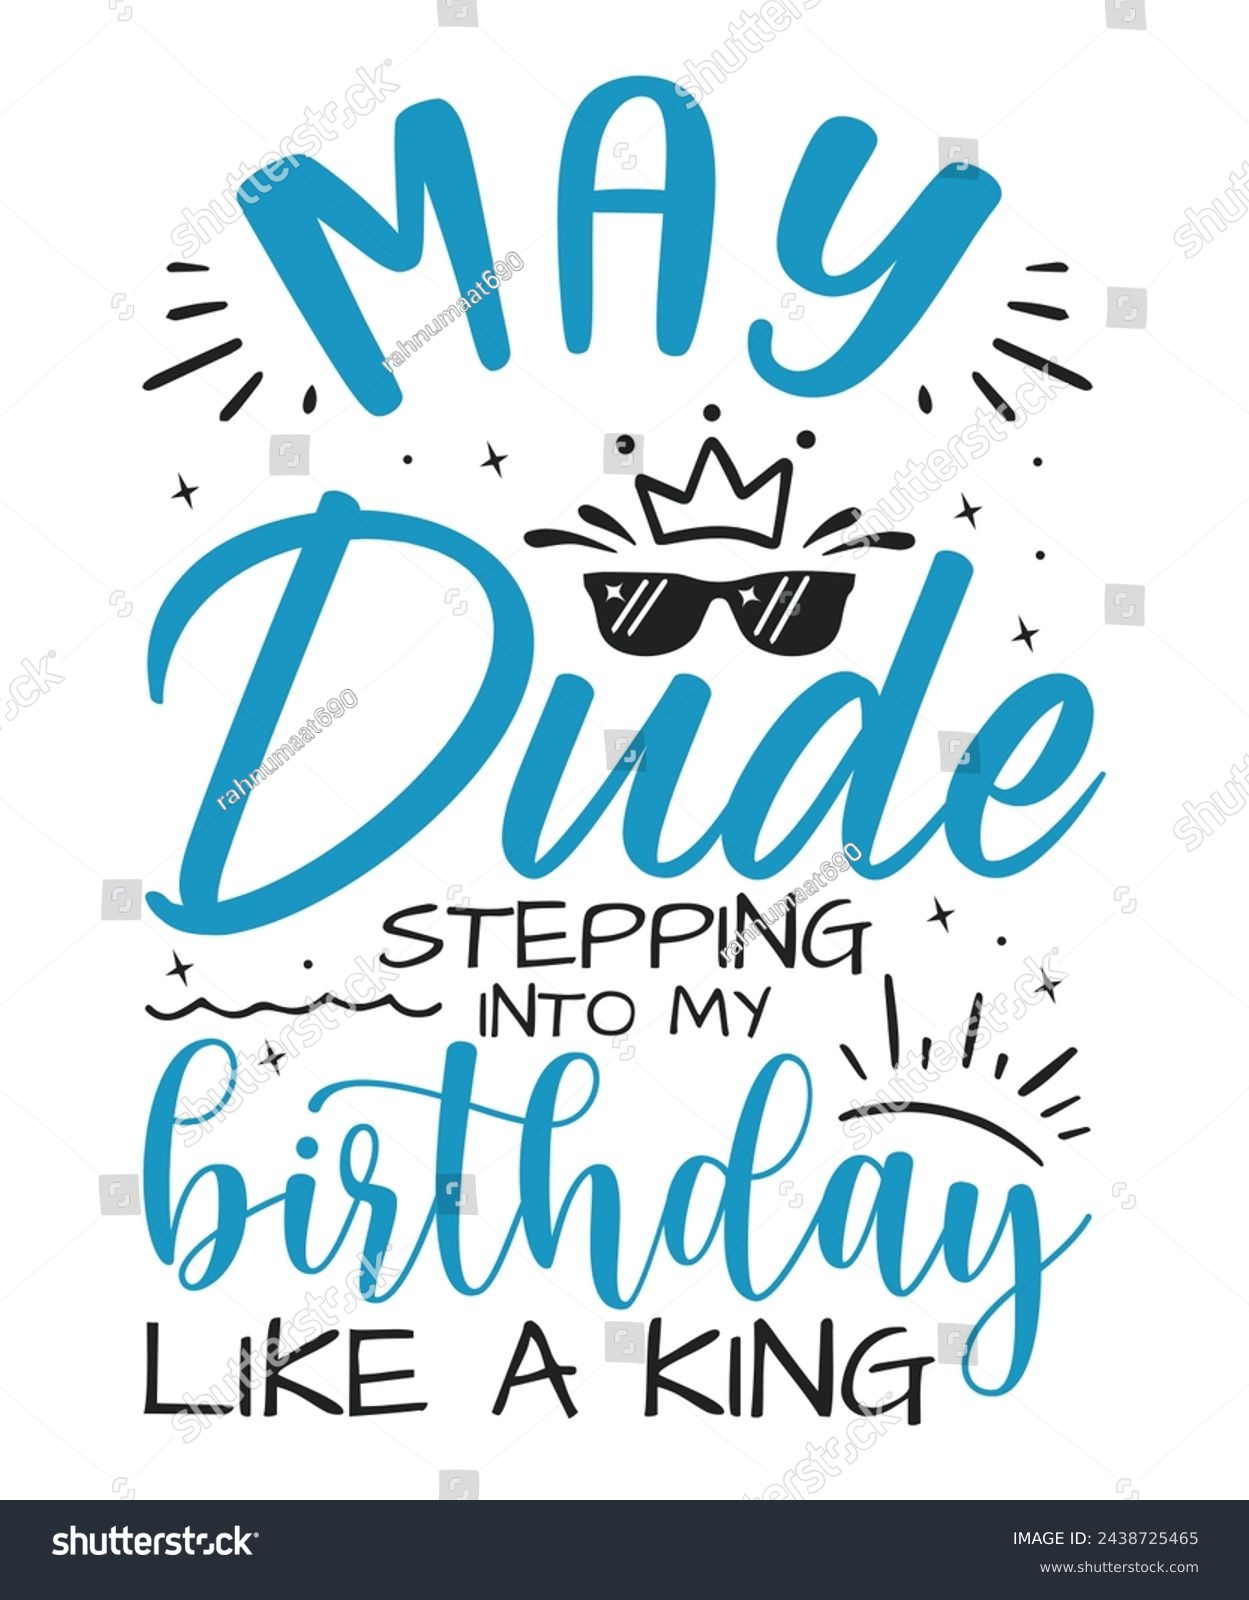 SVG of May dude birthday king design Happy birthday quote designs svg